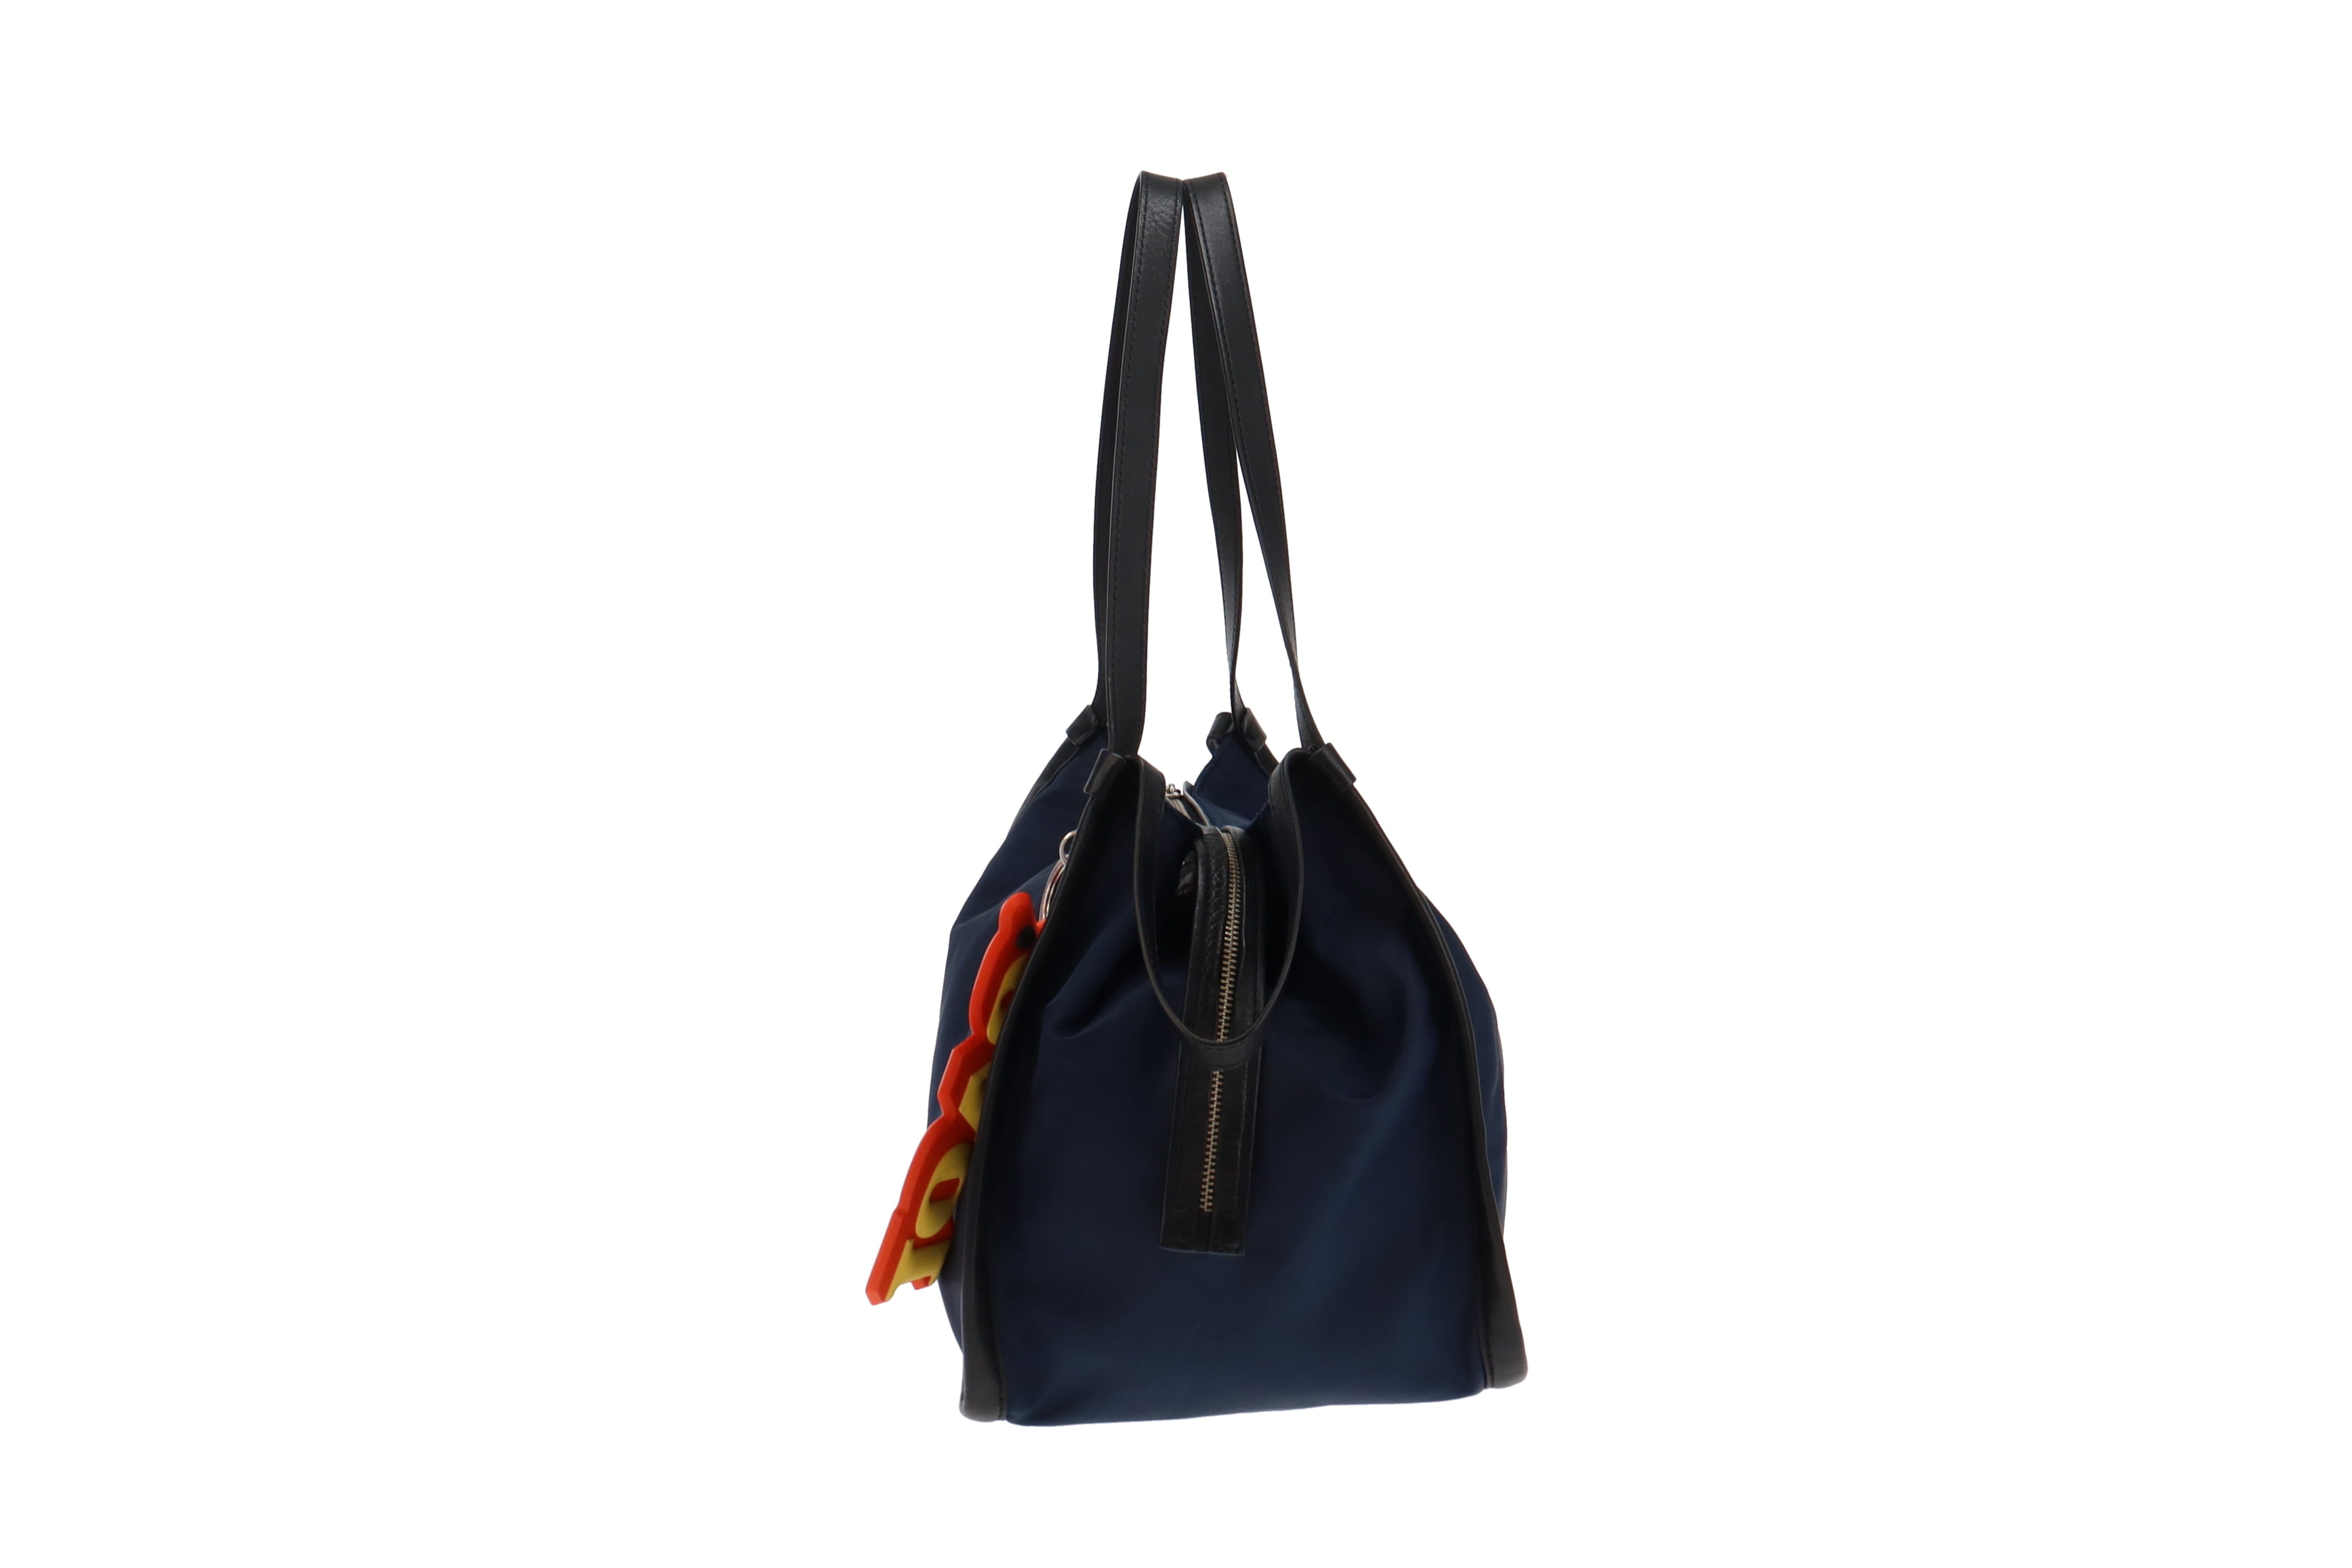 MARK JACOBS SPORT TOTE NAVY￥47300